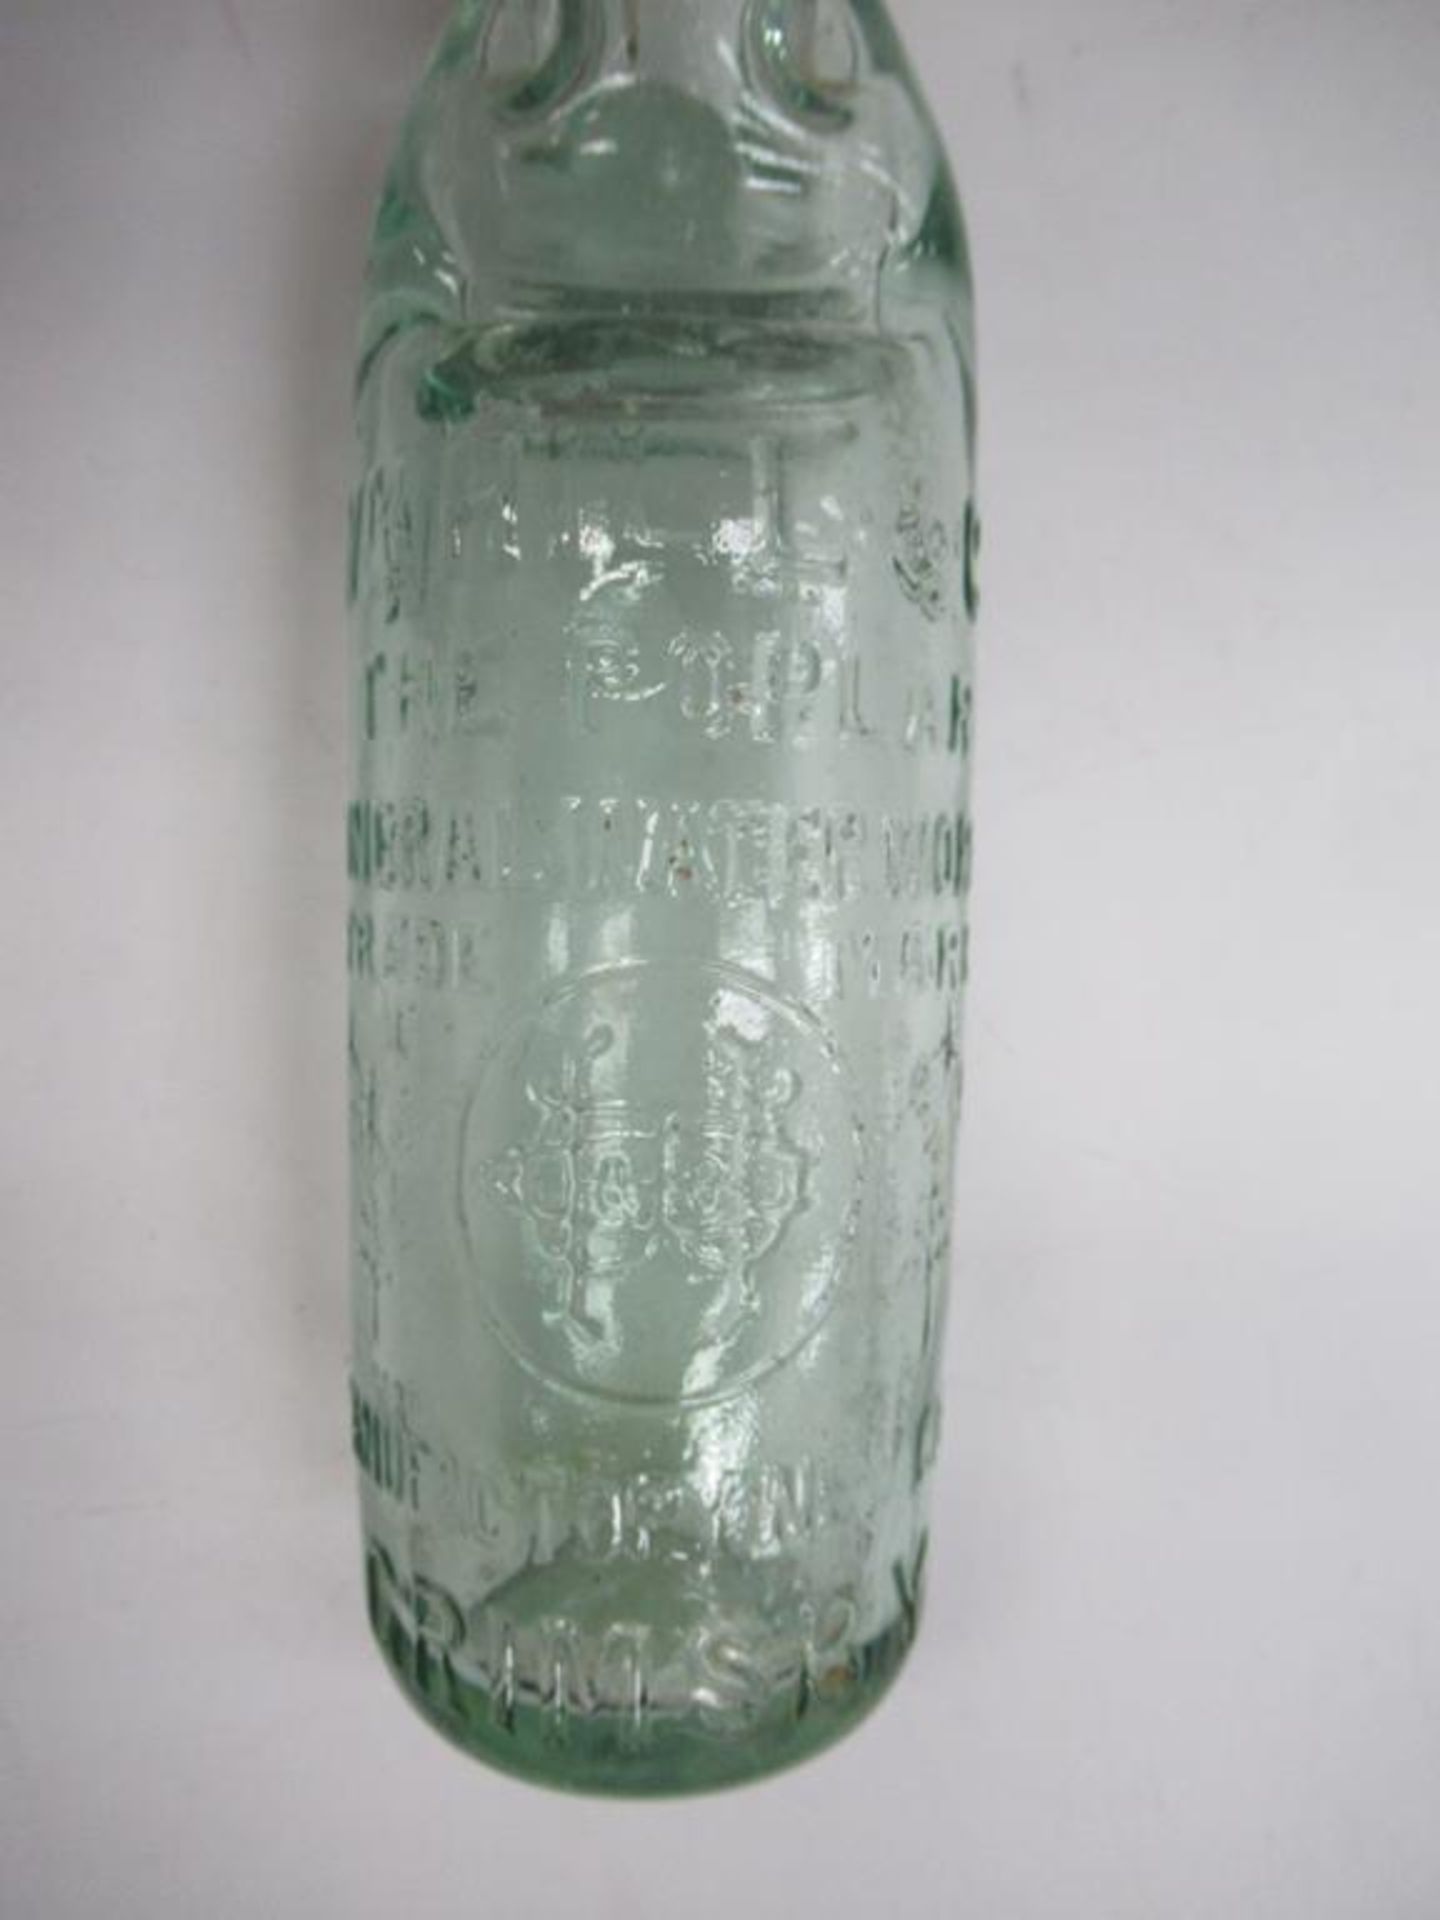 6x Grimsby W.M Hill & Co (4) and W. Hill & Son (2) Codd bottles - Image 9 of 21